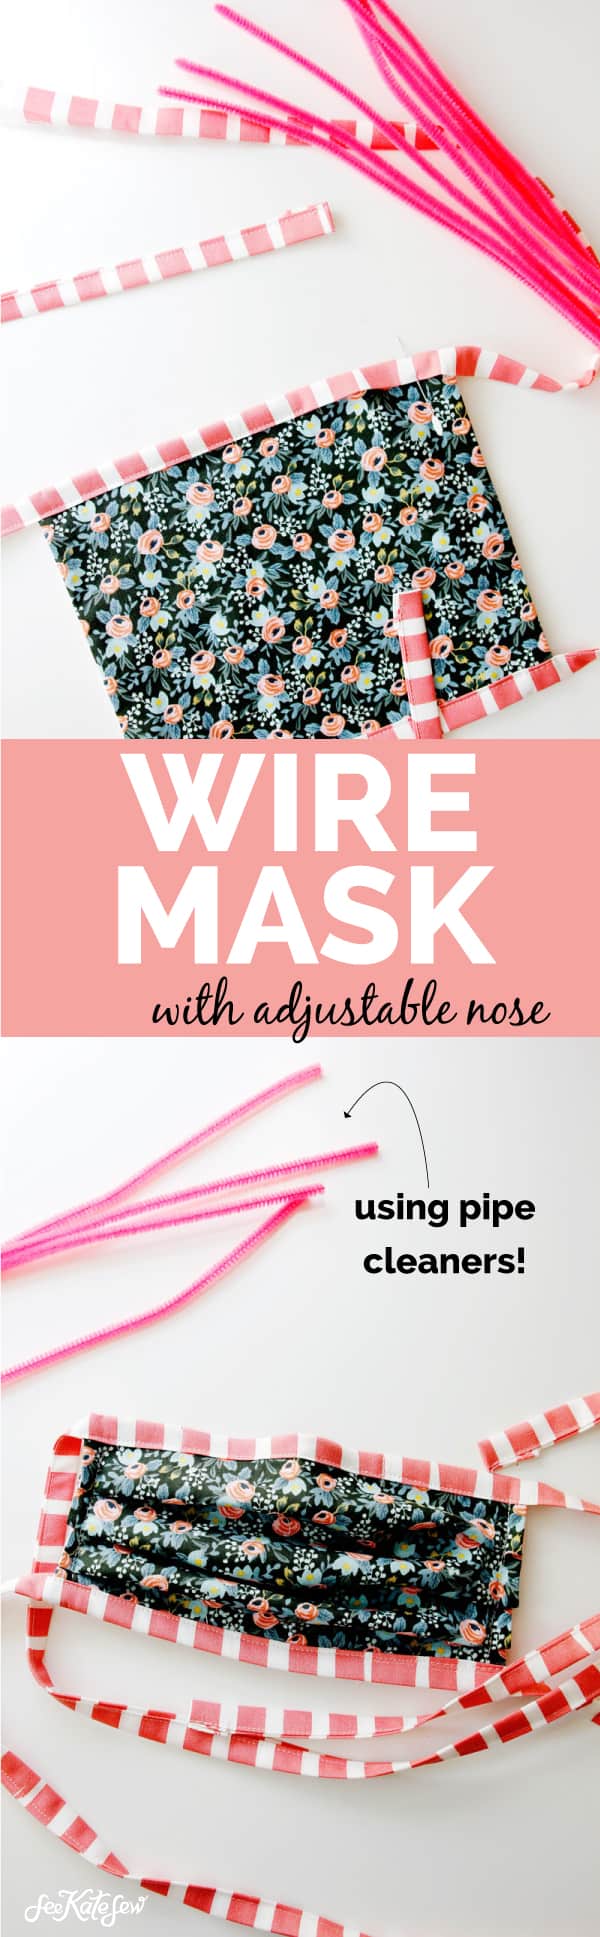 Make a Face Mask with Adjustable Nose